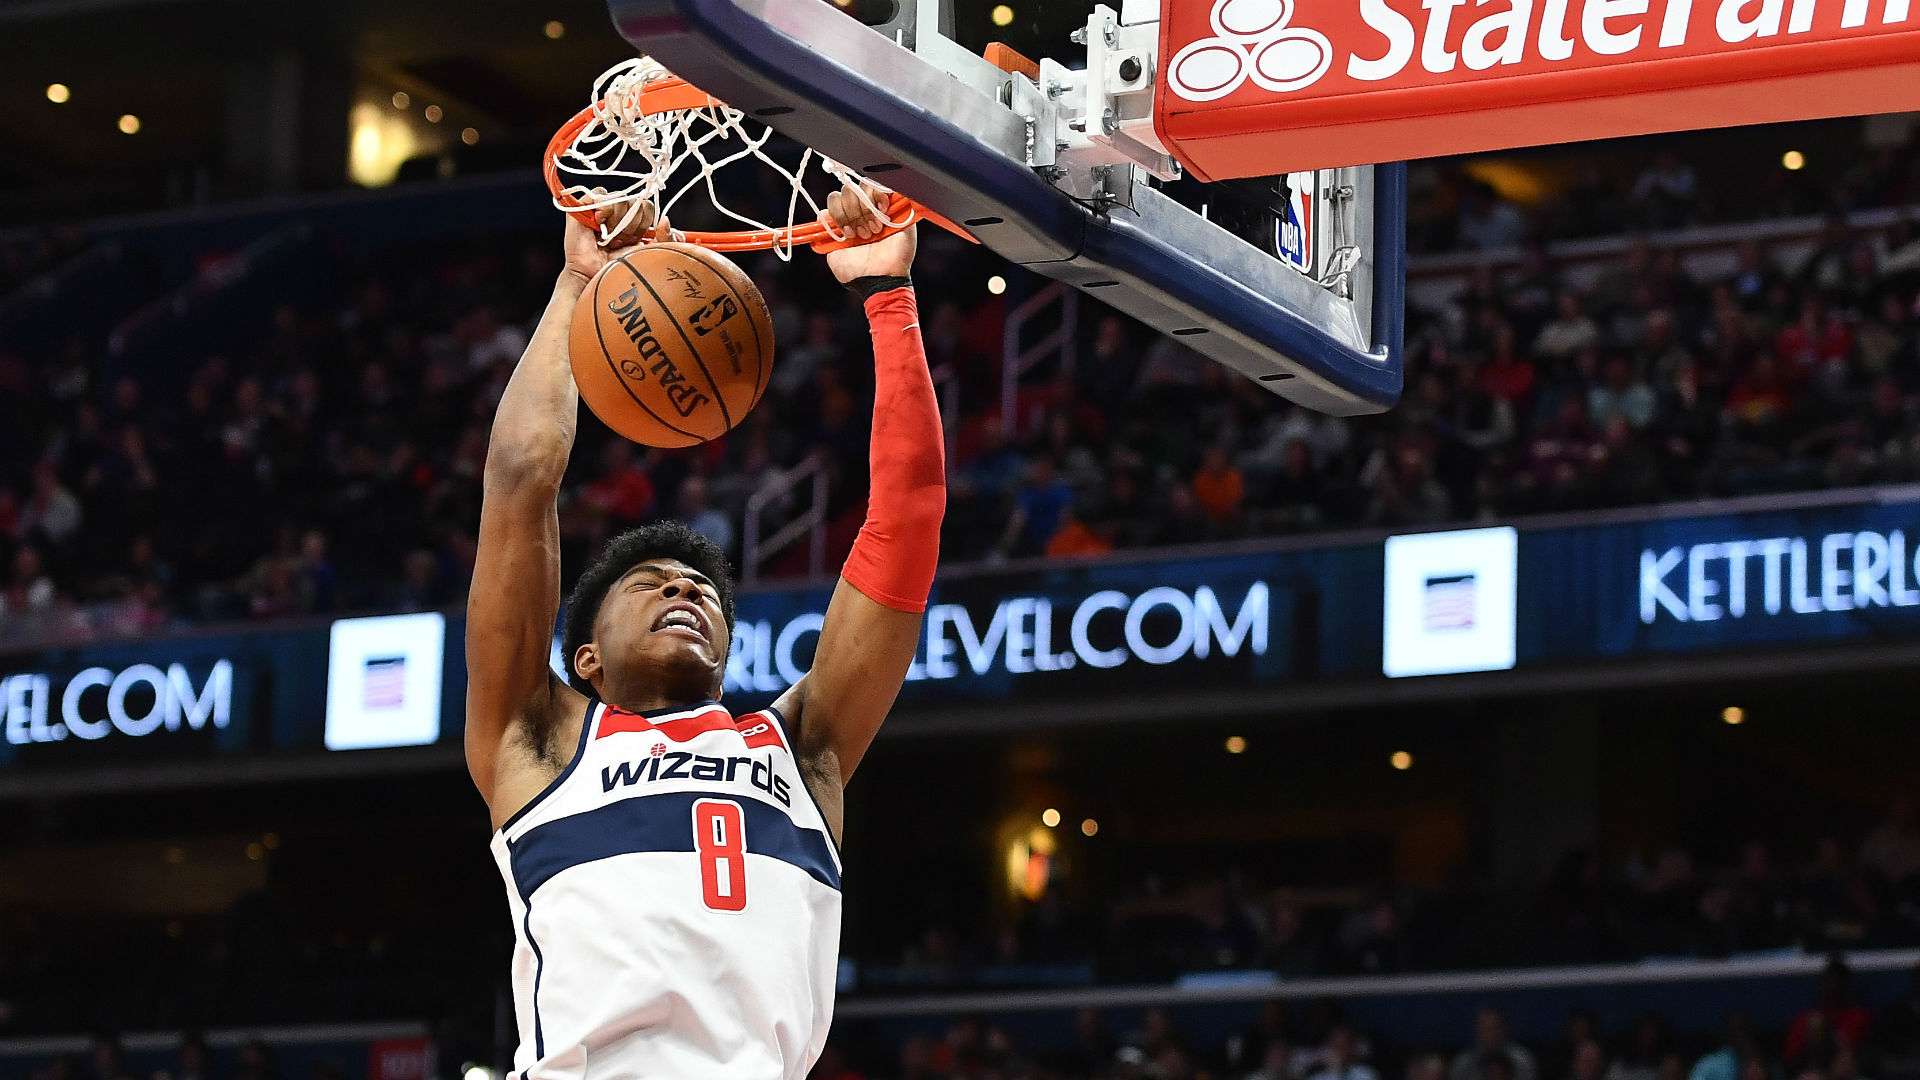 Rui Hachimura Trails Only John Wall in Best Rookie Seasons for Wizards in Last 20 Years